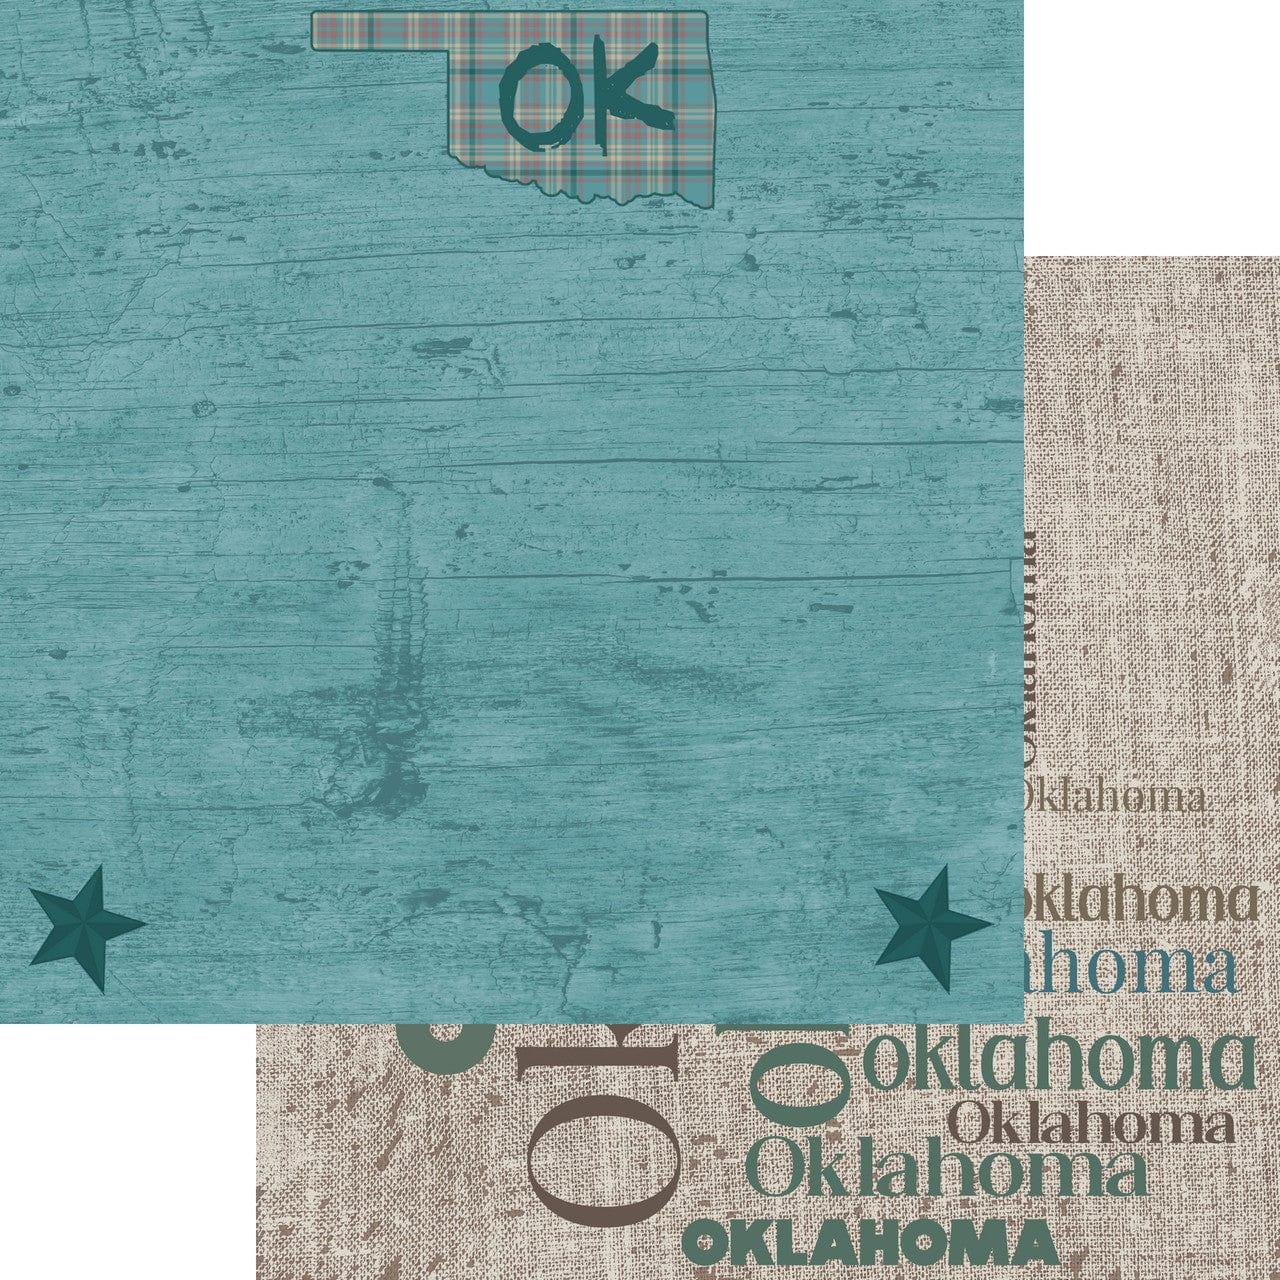 Stateside Collection Oklahoma 12 x 12 Double-Sided Scrapbook Paper by SSC Designs - Scrapbook Supply Companies